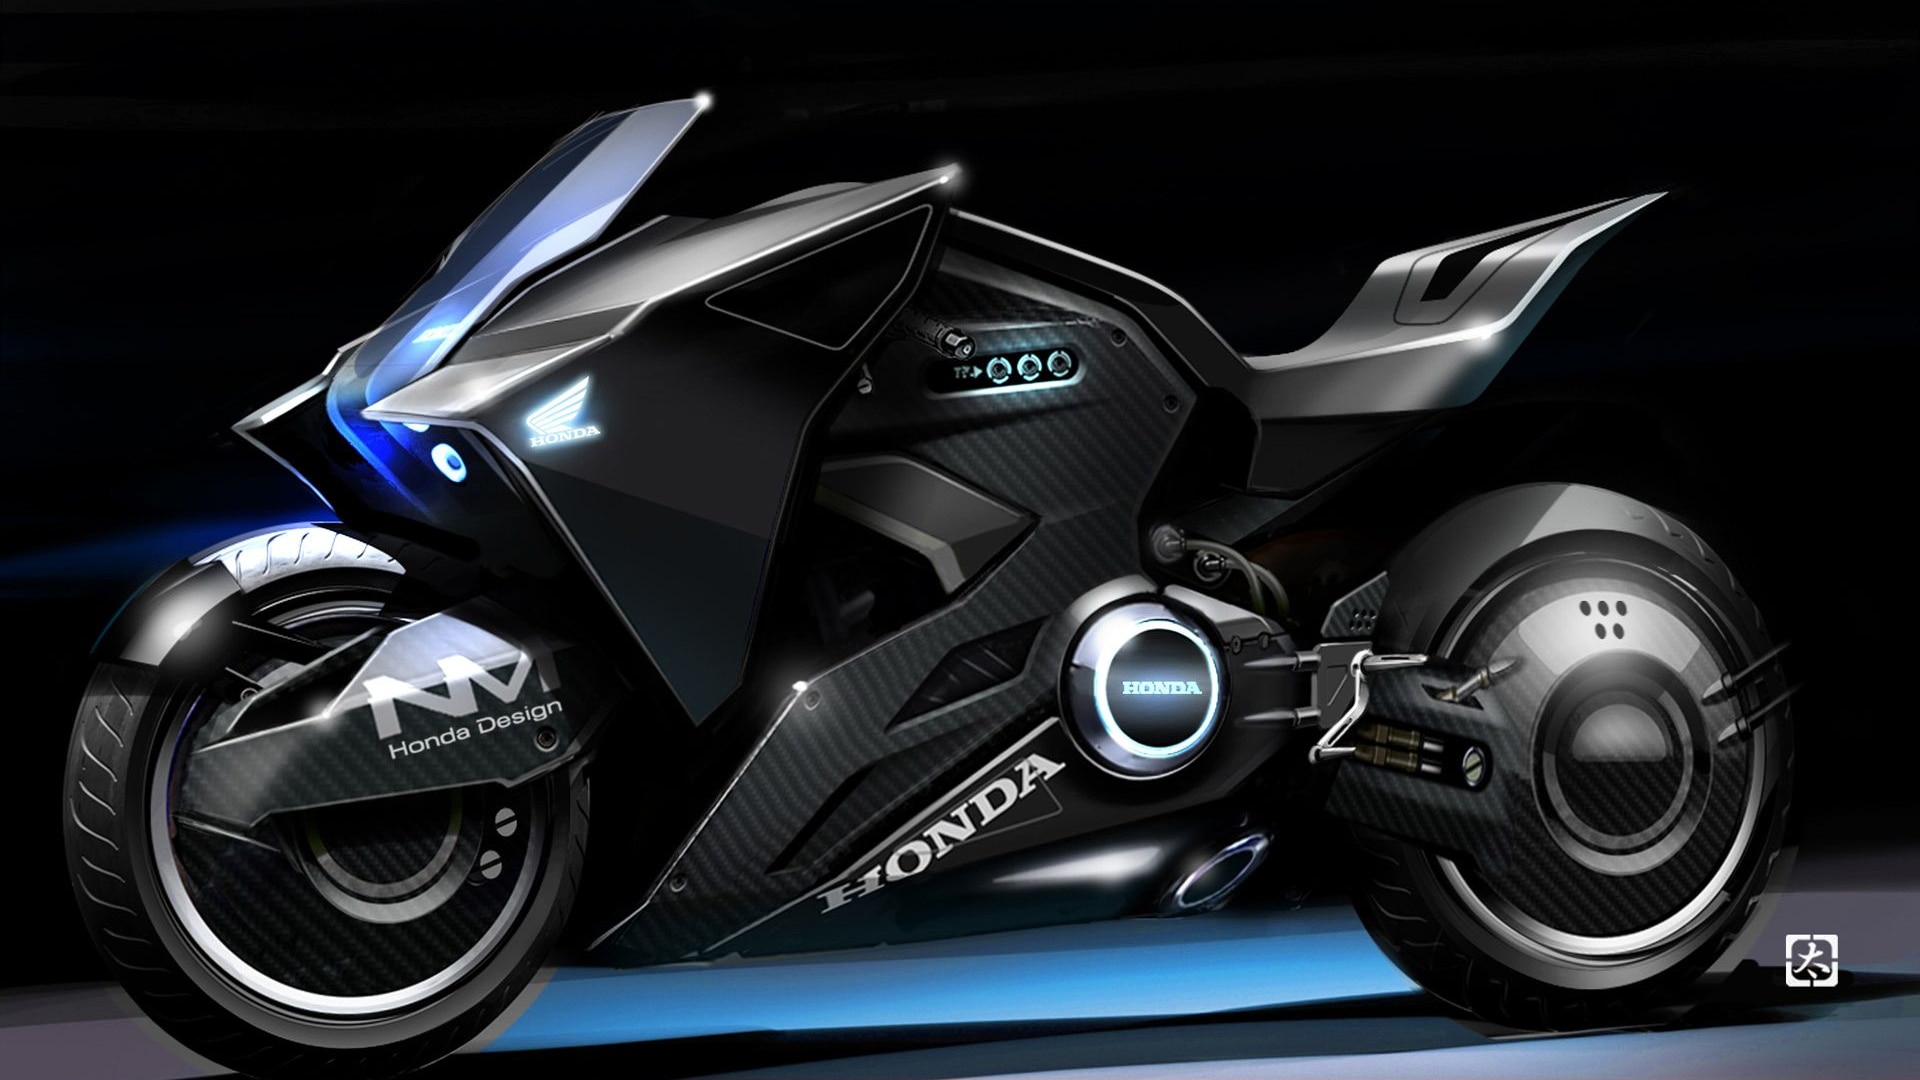 Honda NM4-based concept motorcycle from ‘Ghost in the Shell’